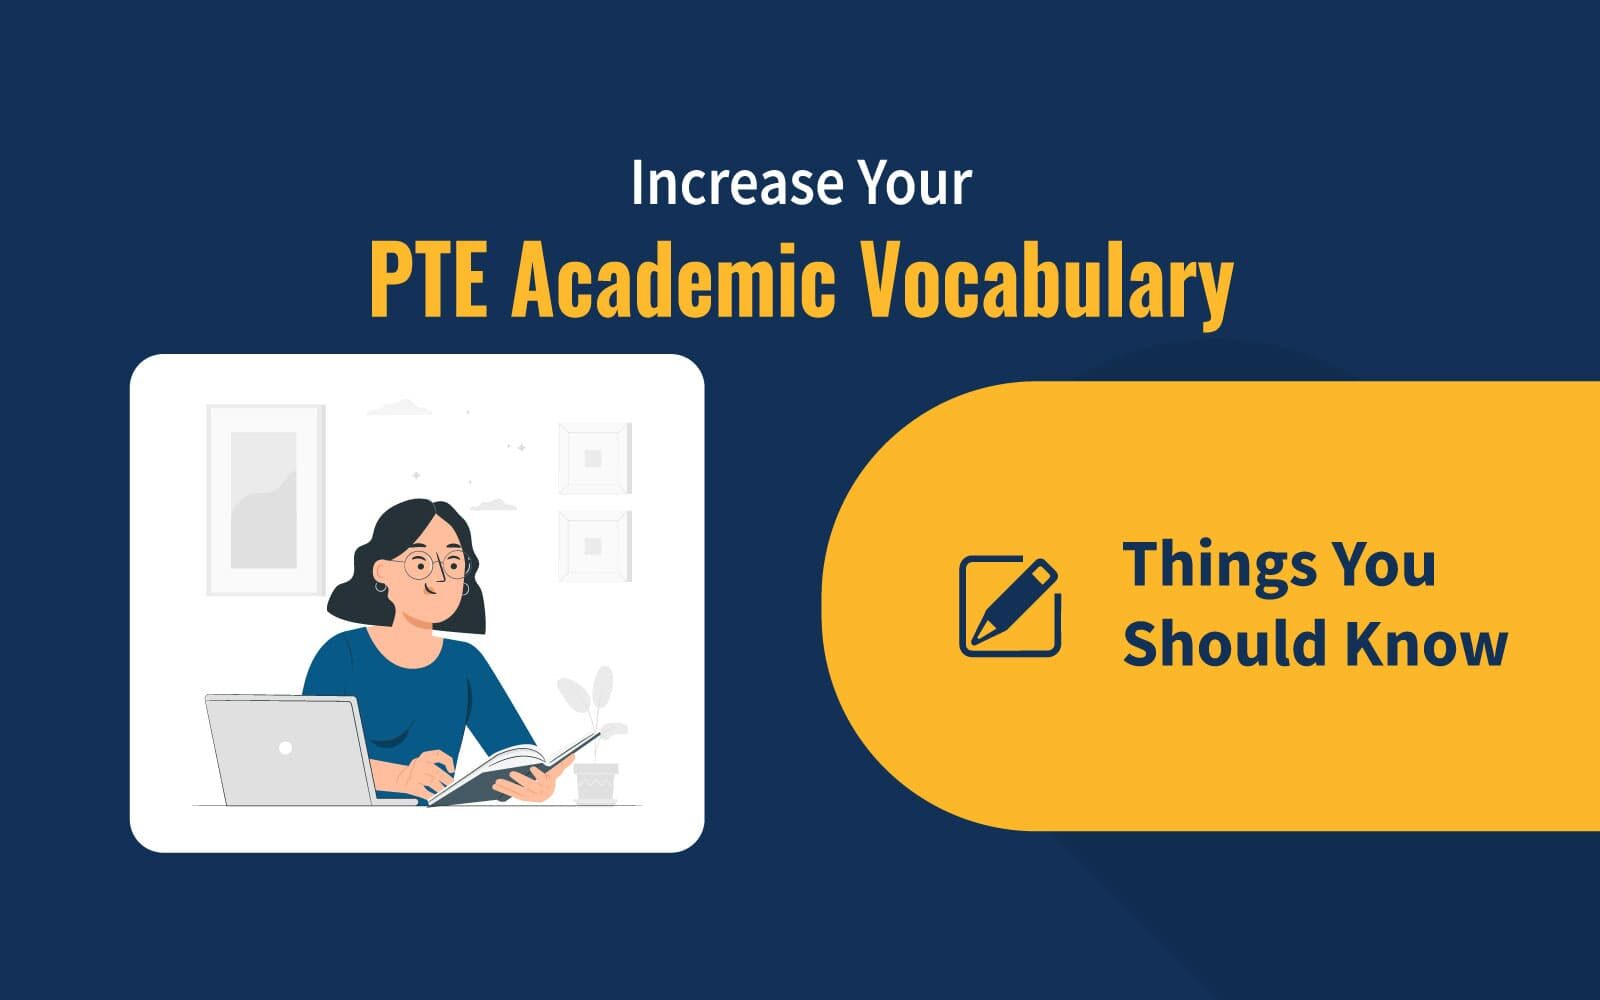 Increase Your PTE Academic Vocabulary